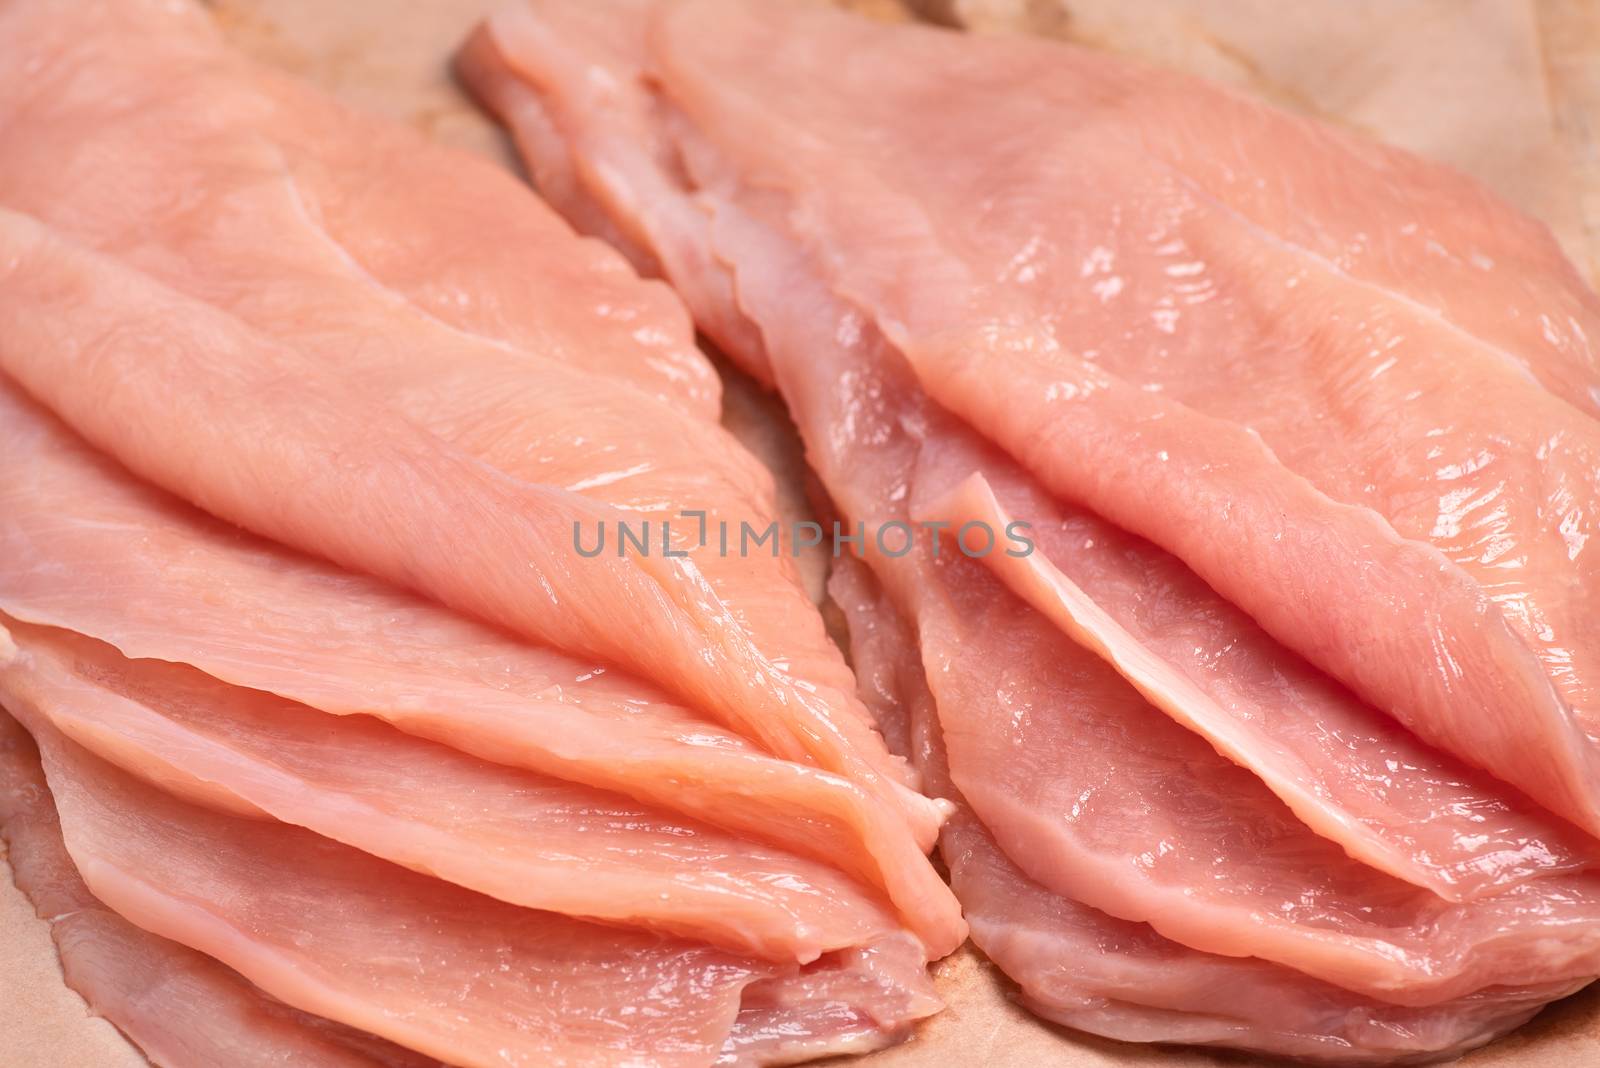 Raw sliced chicken meat close-up. Sotilissimo. Delicious dietary meat.Close-up view of raw, fresh, choped and sliced chicken meat Cooking,food of meat and fillets.